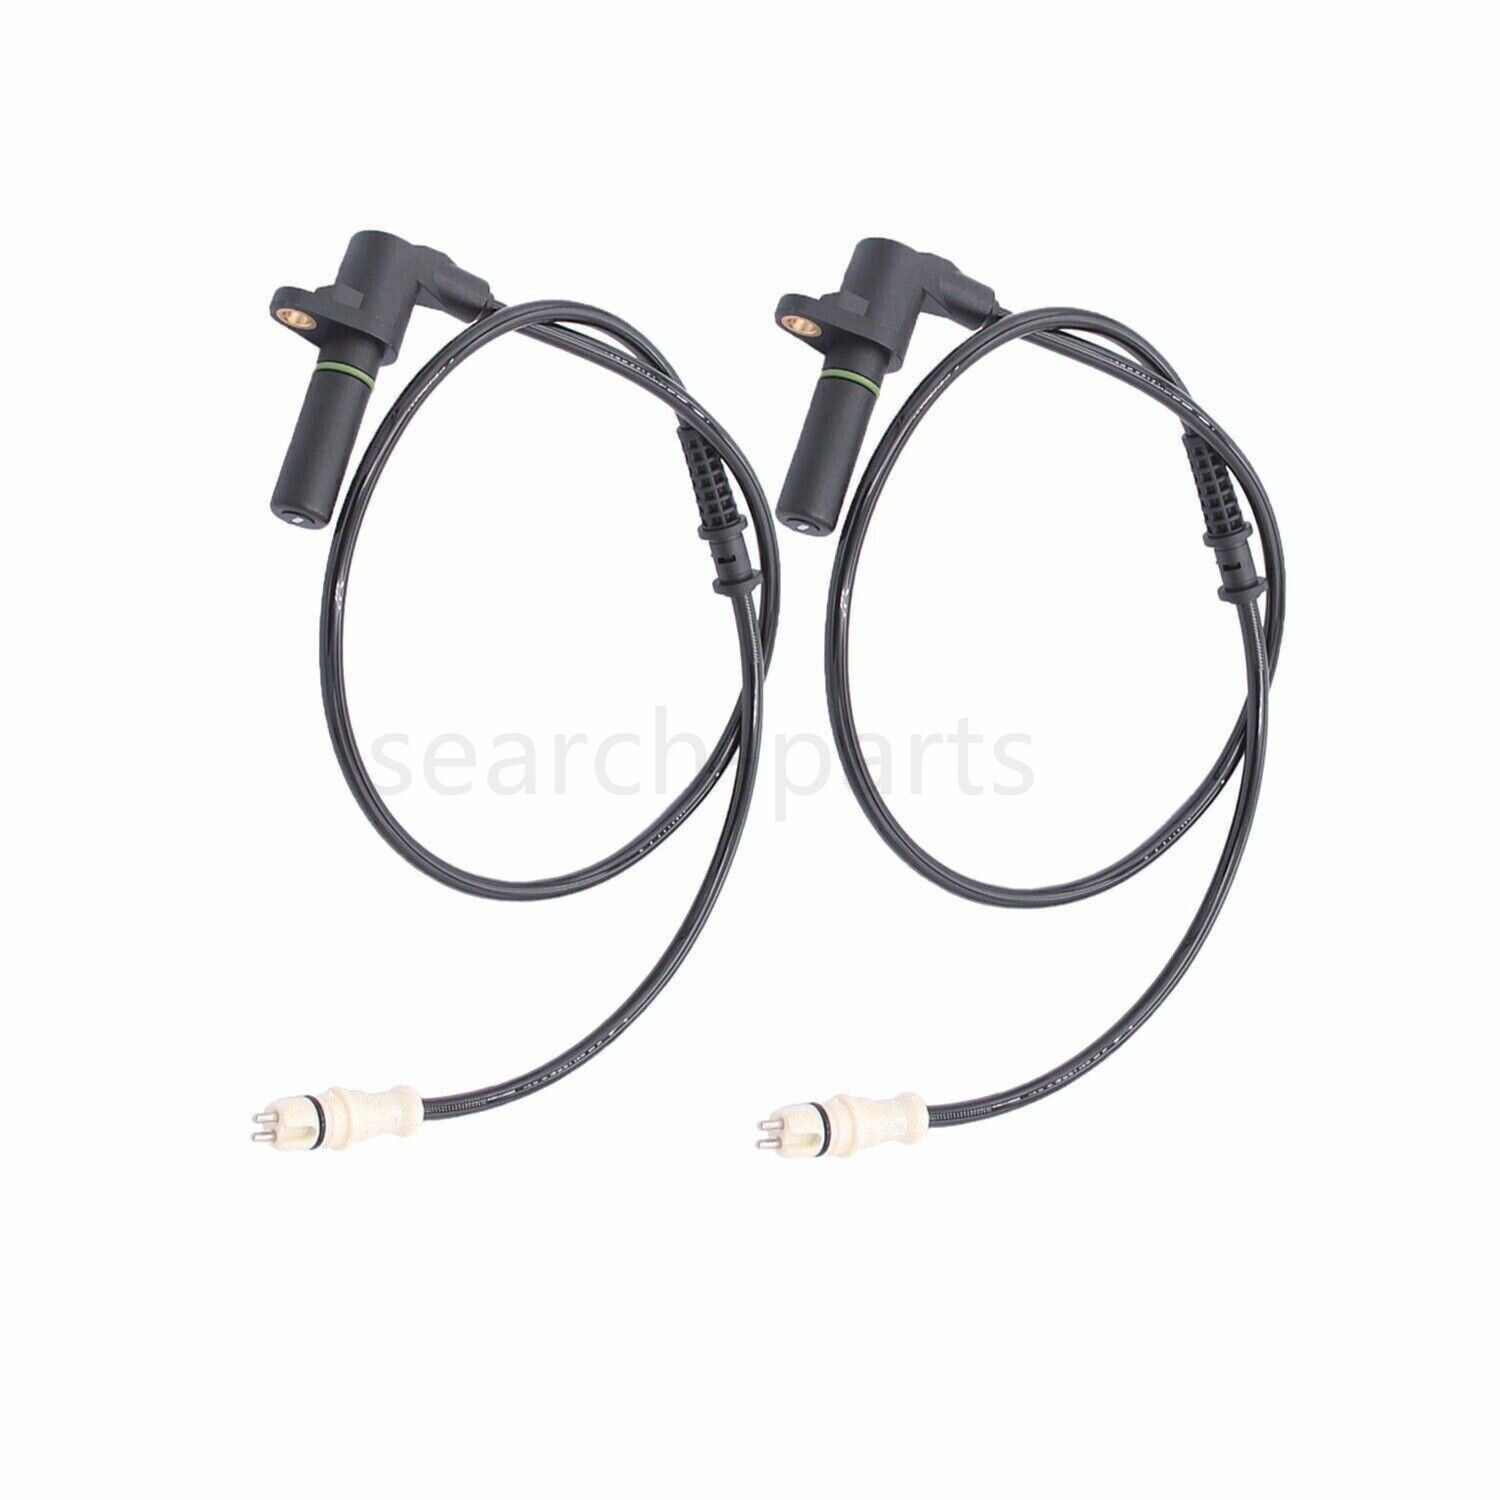 Front Left & Front Right ABS Wheel Speed Sensor for Mercedes-Benz G55 AMG G500